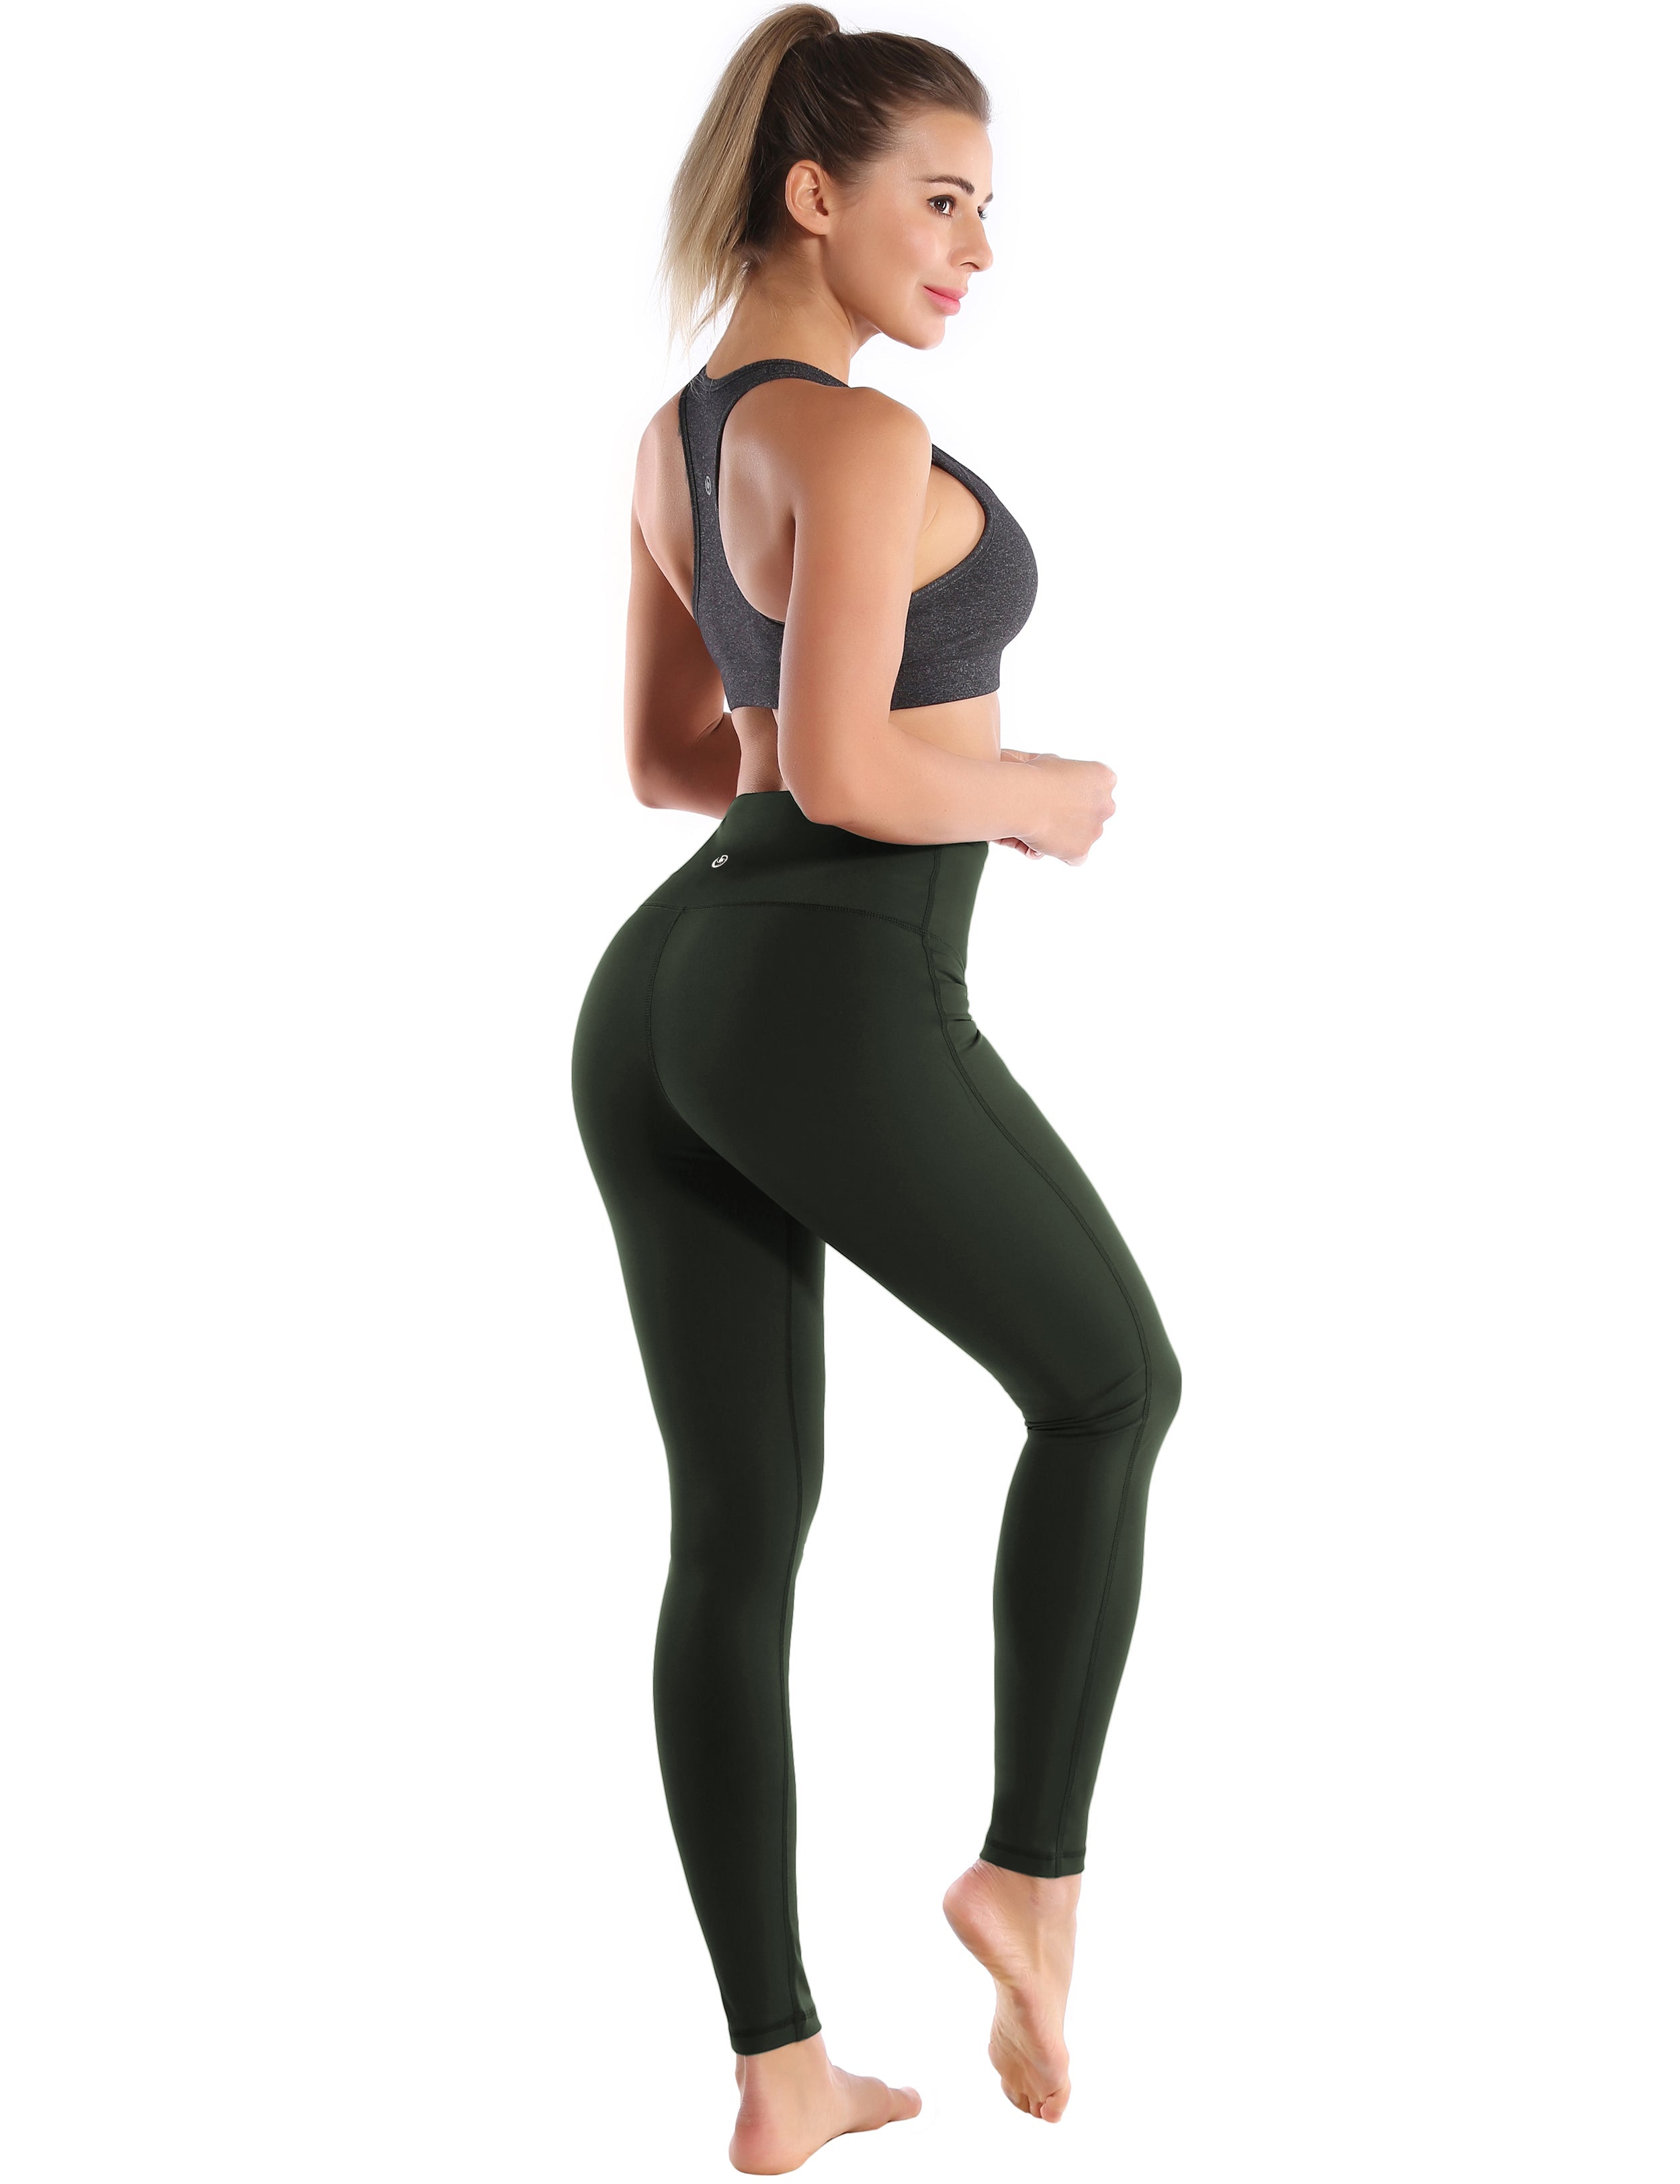 High Waist Side Line Biking Pants olivegray Side Line is Make Your Legs Look Longer and Thinner 75%Nylon/25%Spandex Fabric doesn't attract lint easily 4-way stretch No see-through Moisture-wicking Tummy control Inner pocket Two lengths